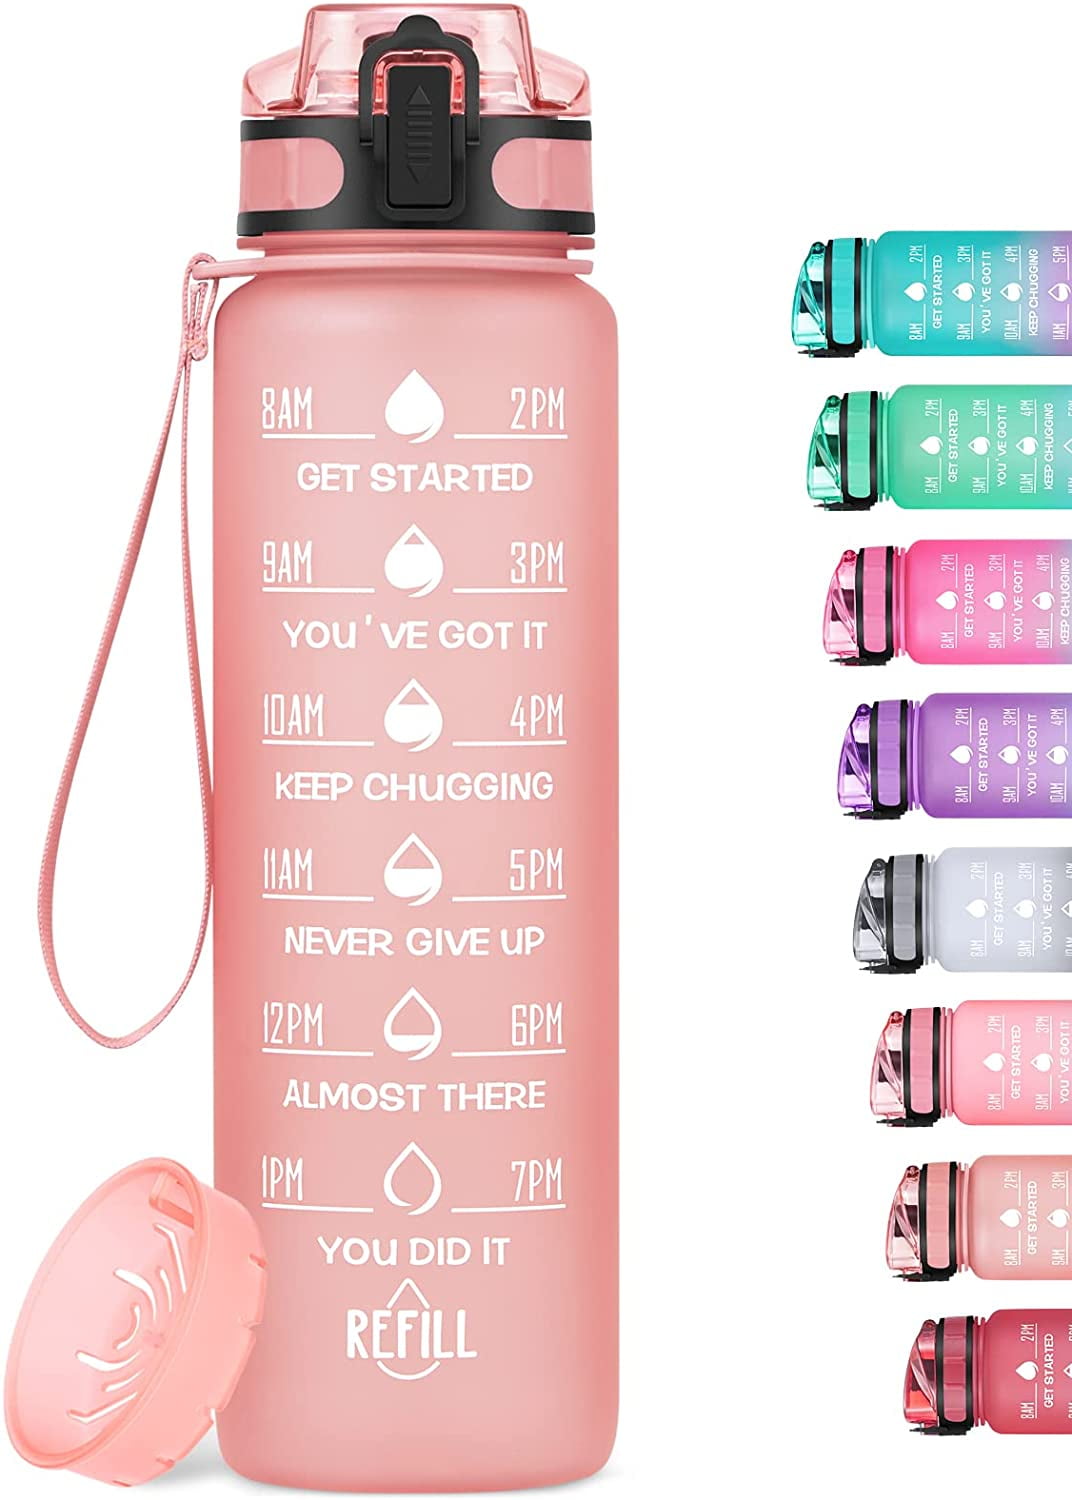 GOSWAG 32oz Motivational Water Bottles with Time Marker & Fruit Strainer,  Sports Water Bottle with T…See more GOSWAG 32oz Motivational Water Bottles